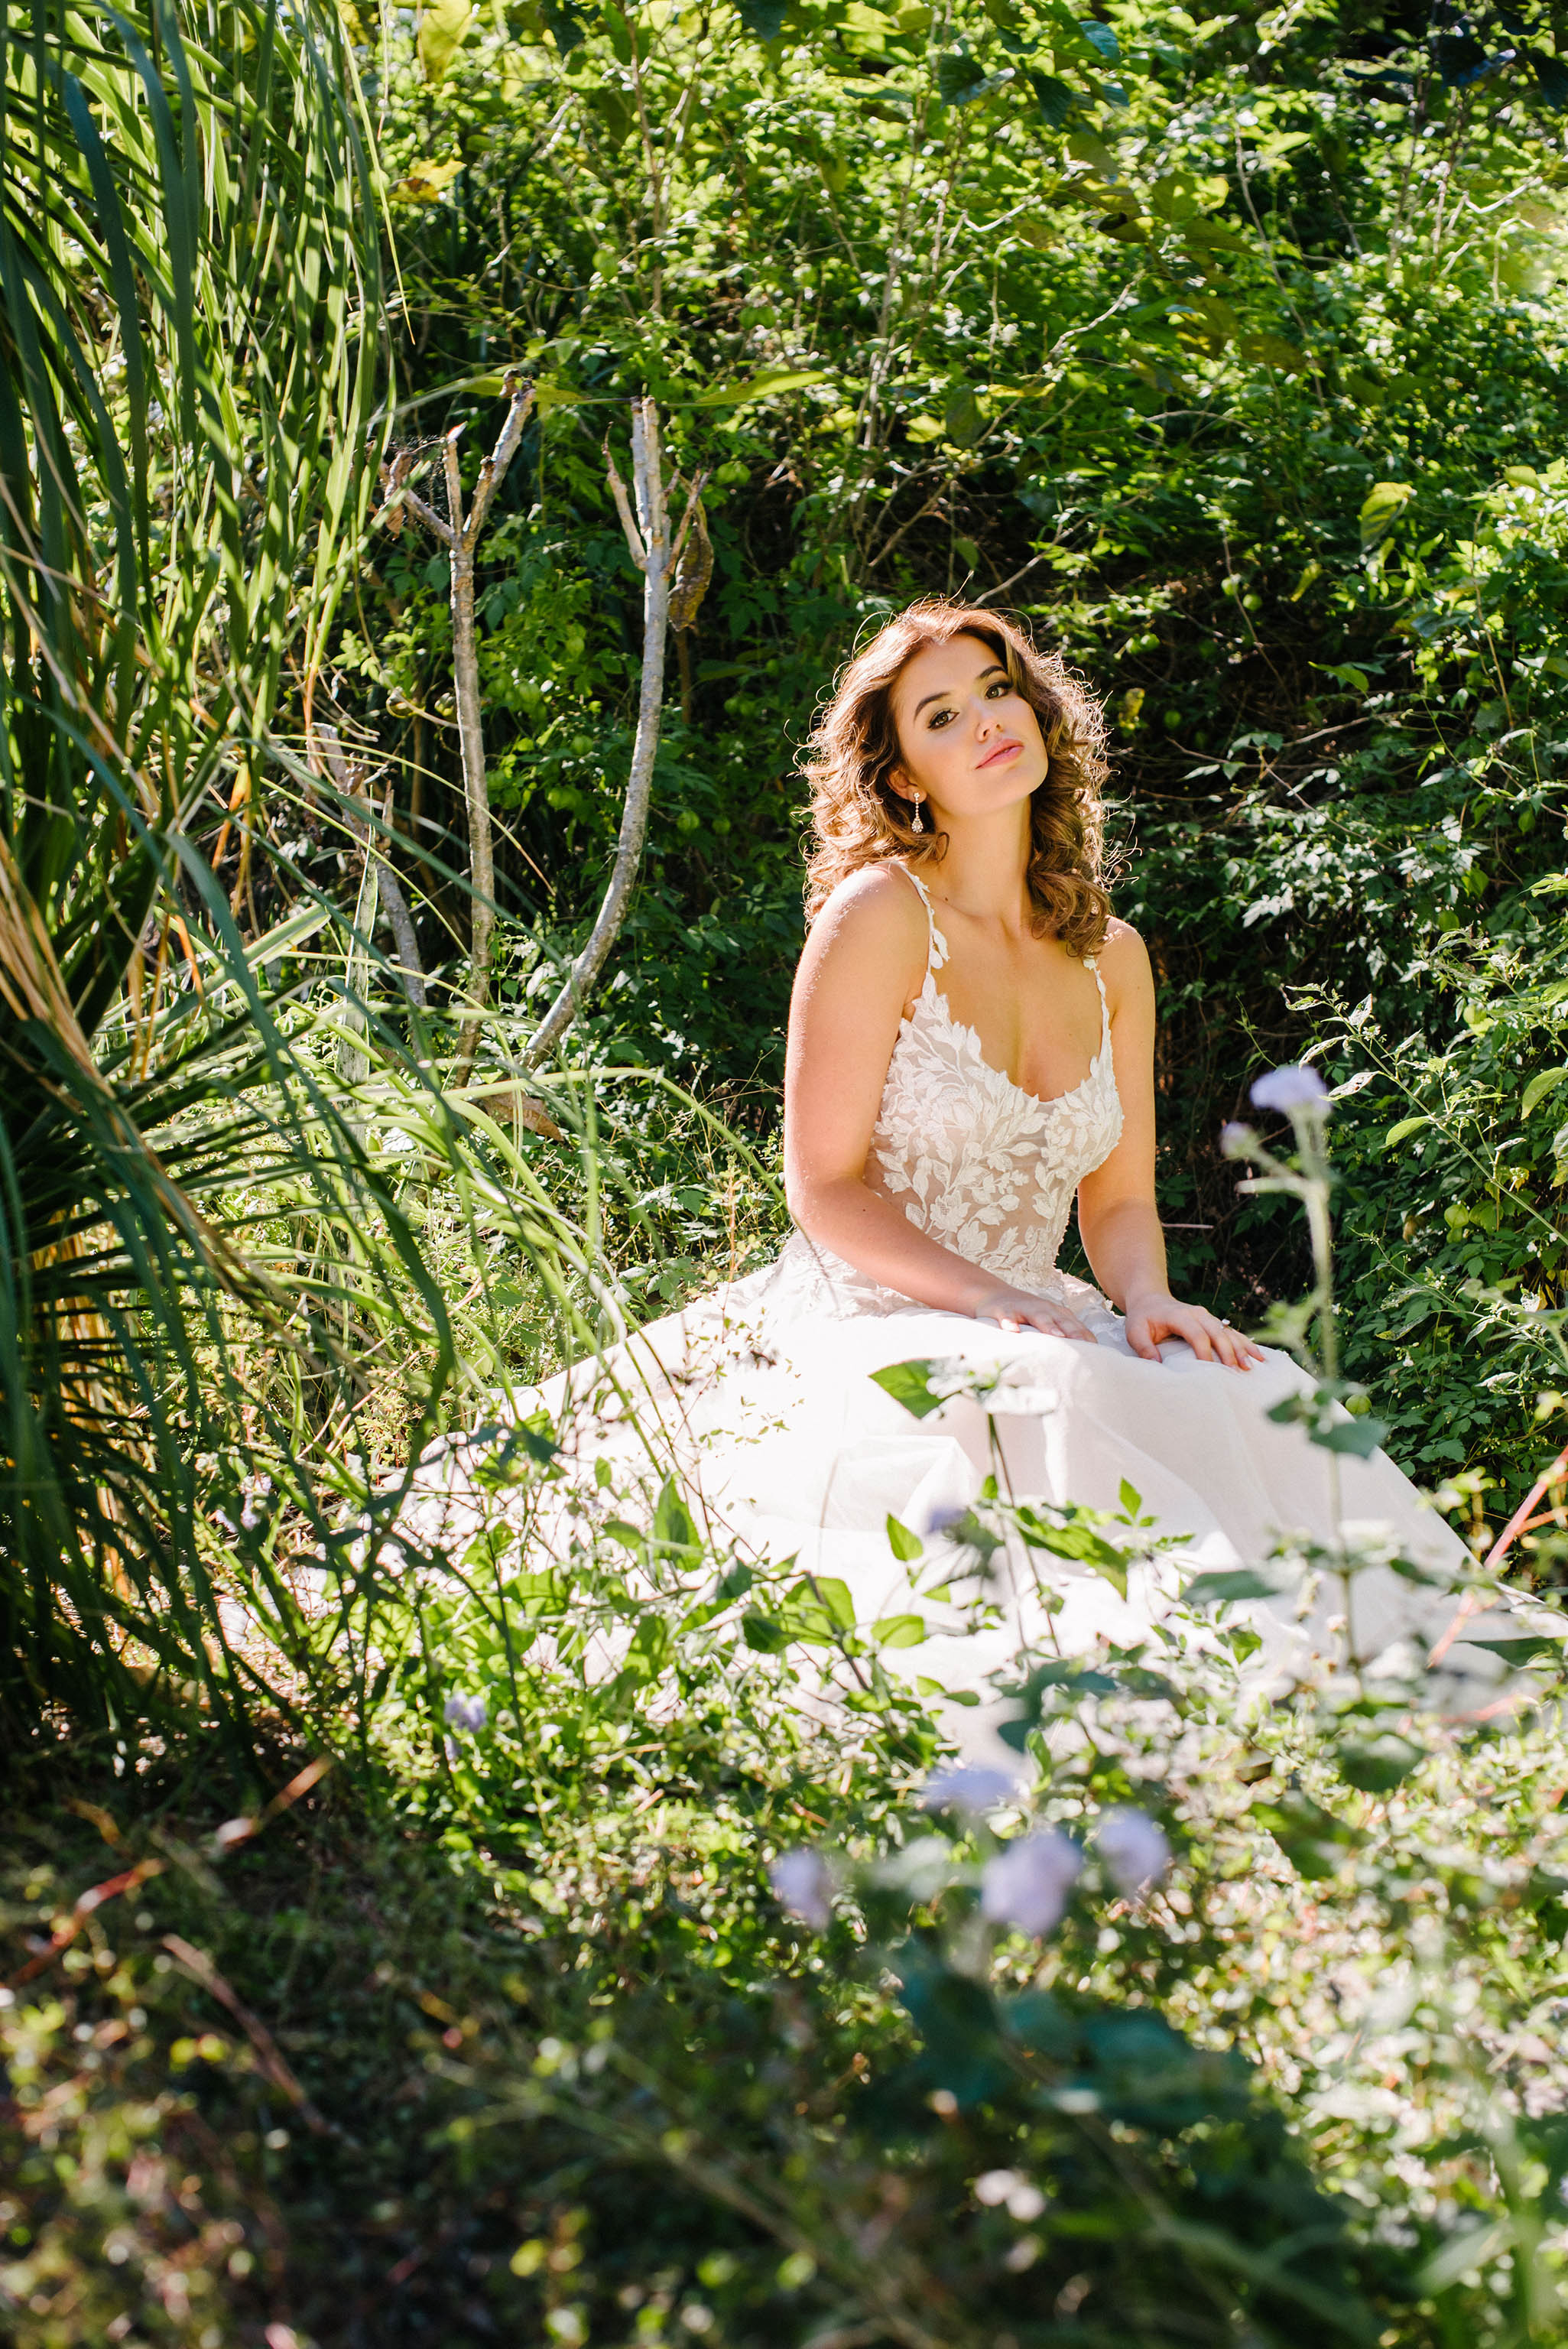 bride in floral lace wedding dress in greenery